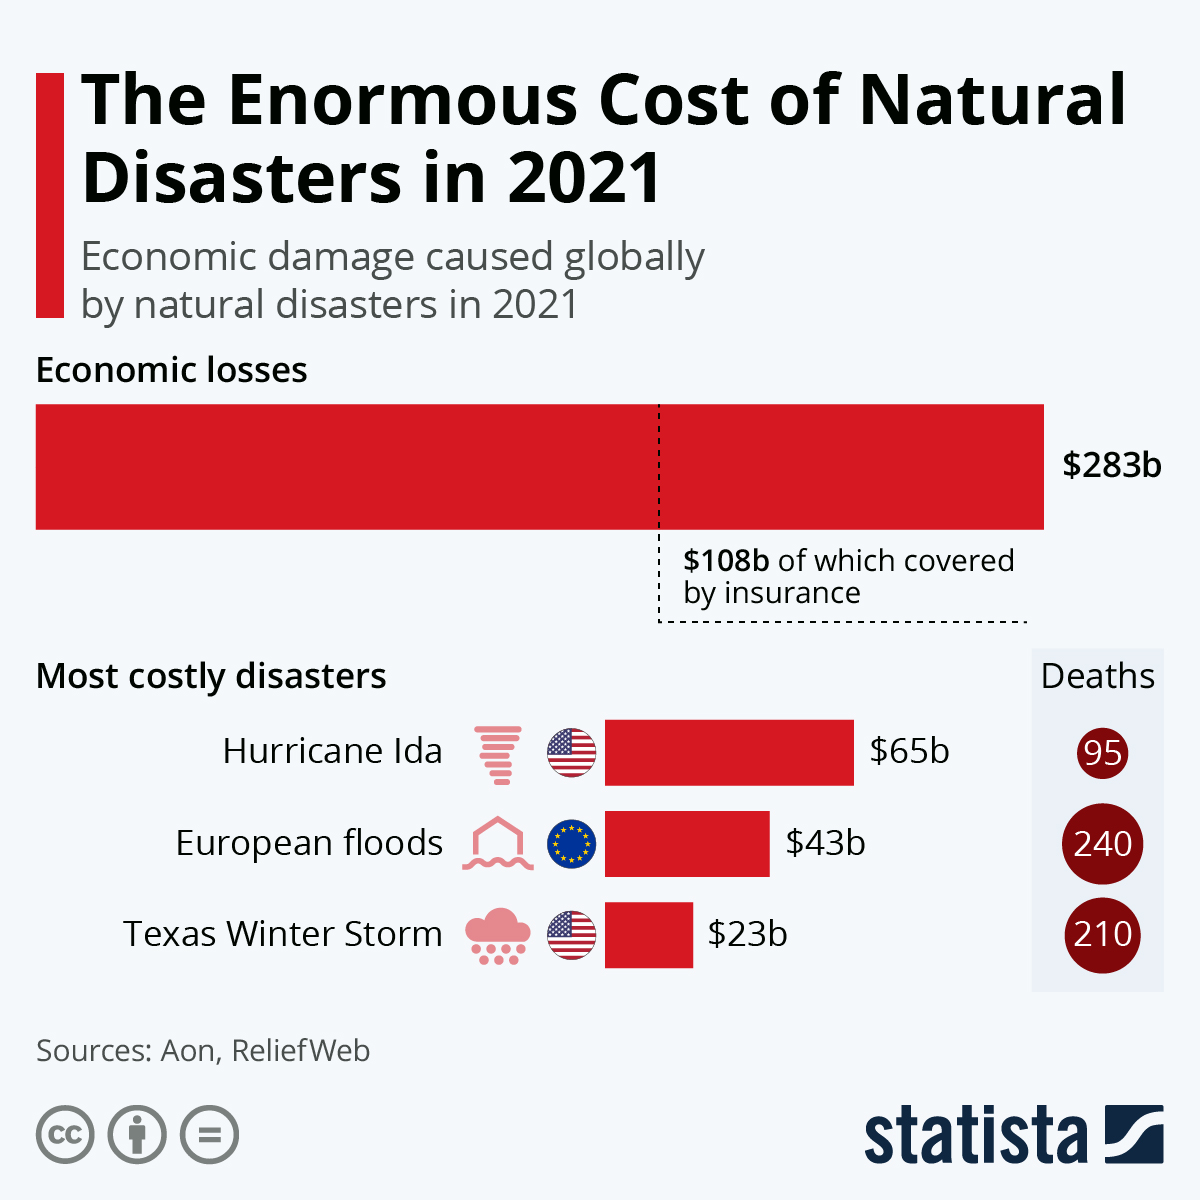 The Enormous Cost of Natural Disasters in 2021